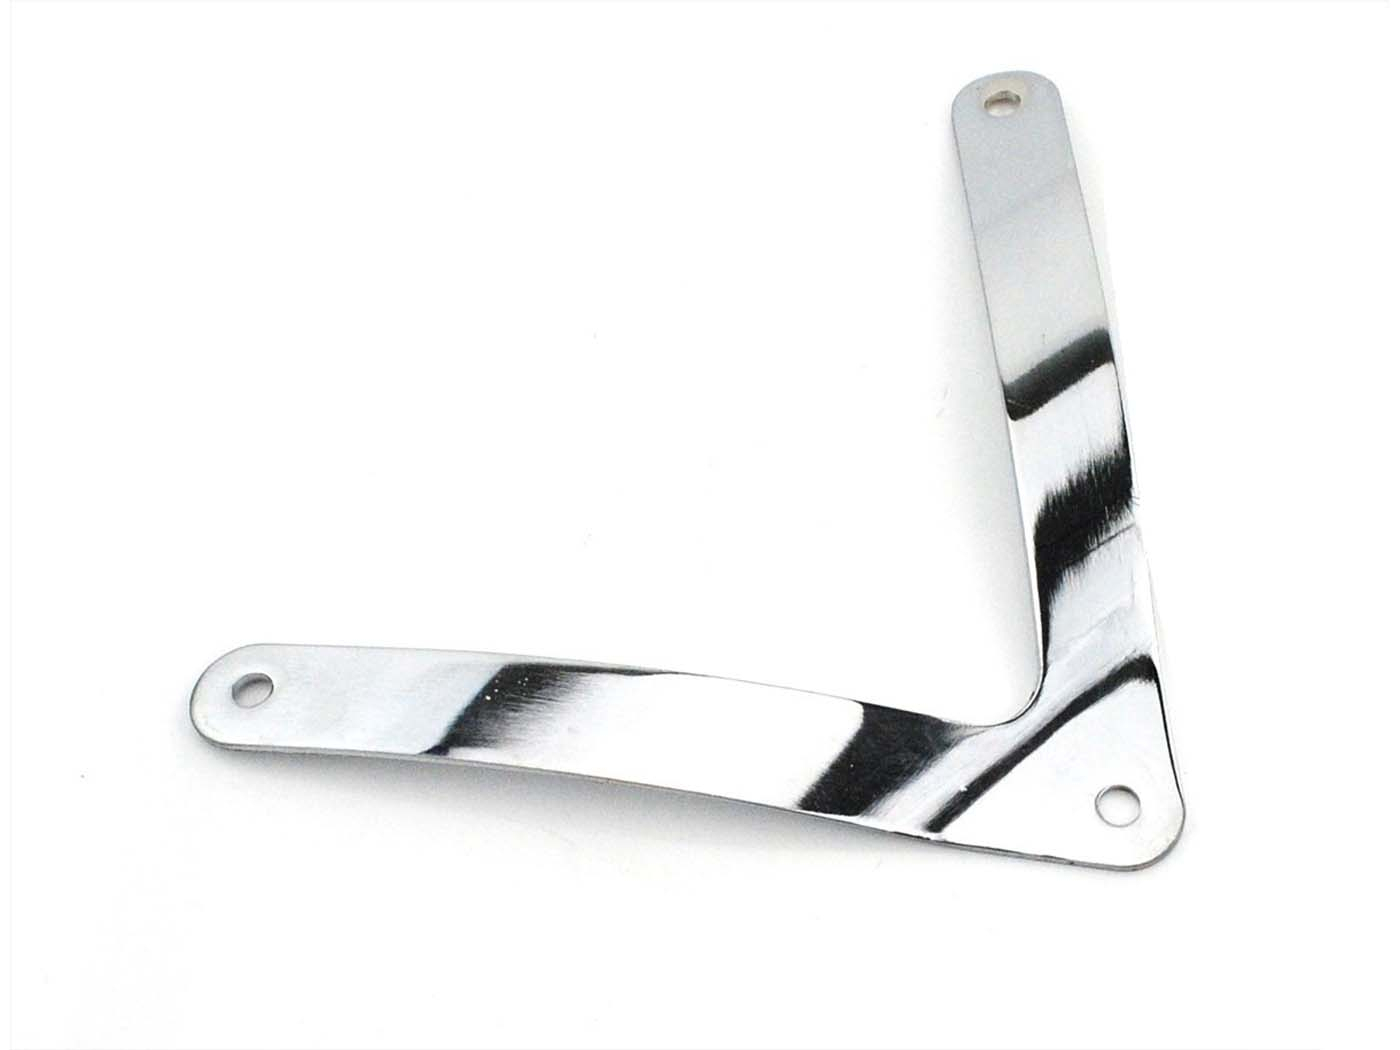 Mudguard Holder Universal Chrome Front For Mustang Moped